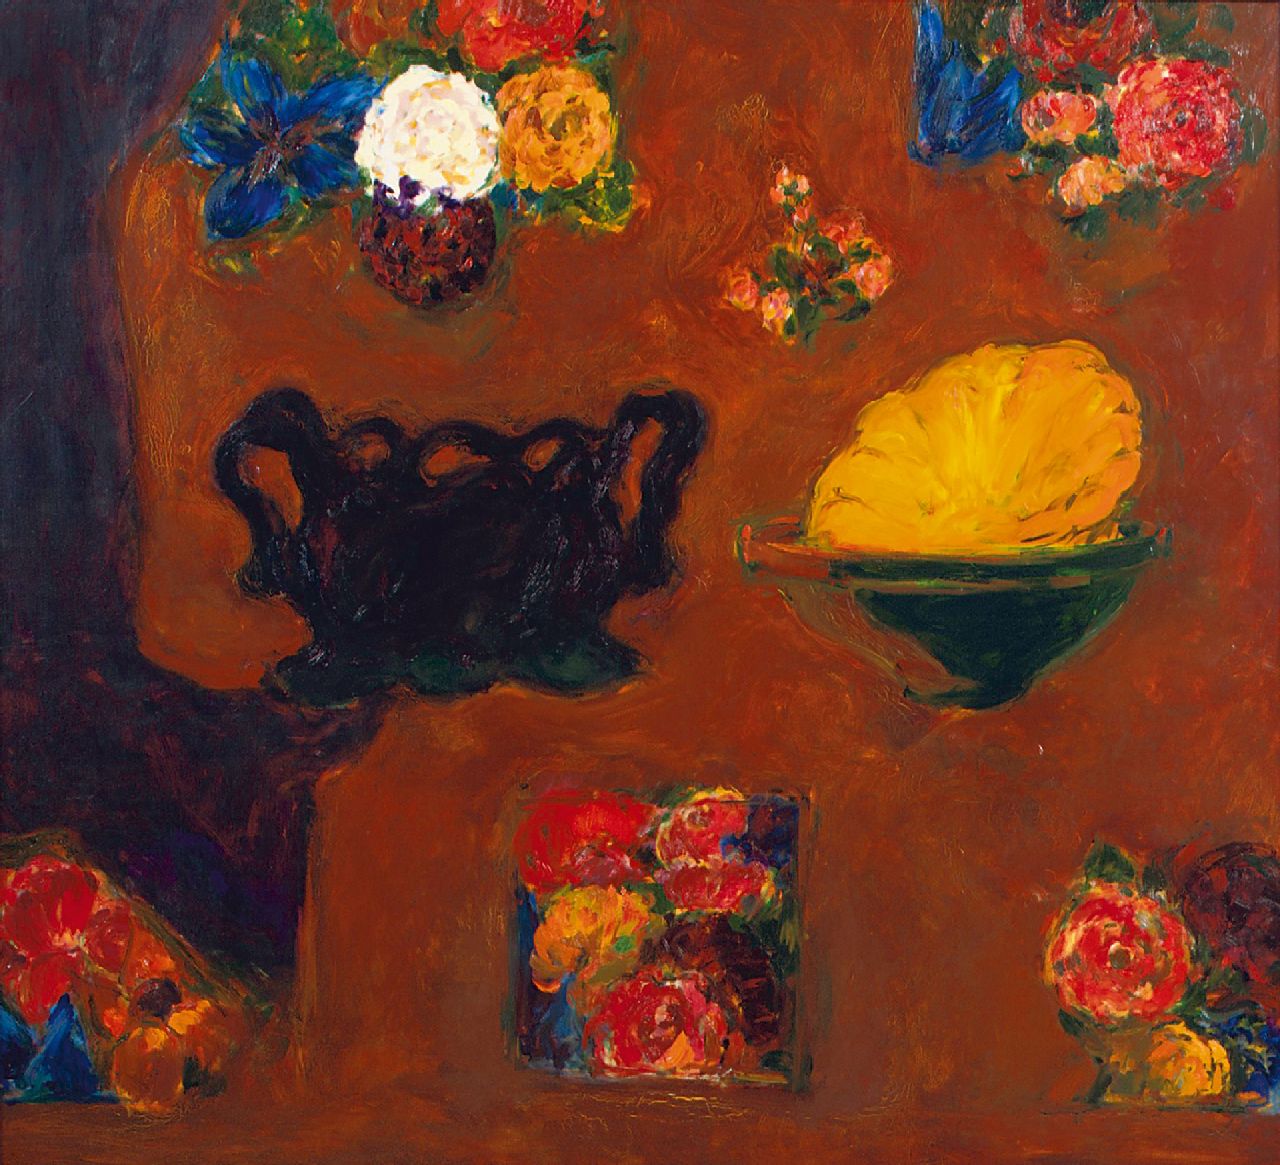 Hans van Hoek | Bowl within a bowl, oil on canvas, 145.0 x 145.0 cm, signed on the reverse and dated on the reverse '95-97